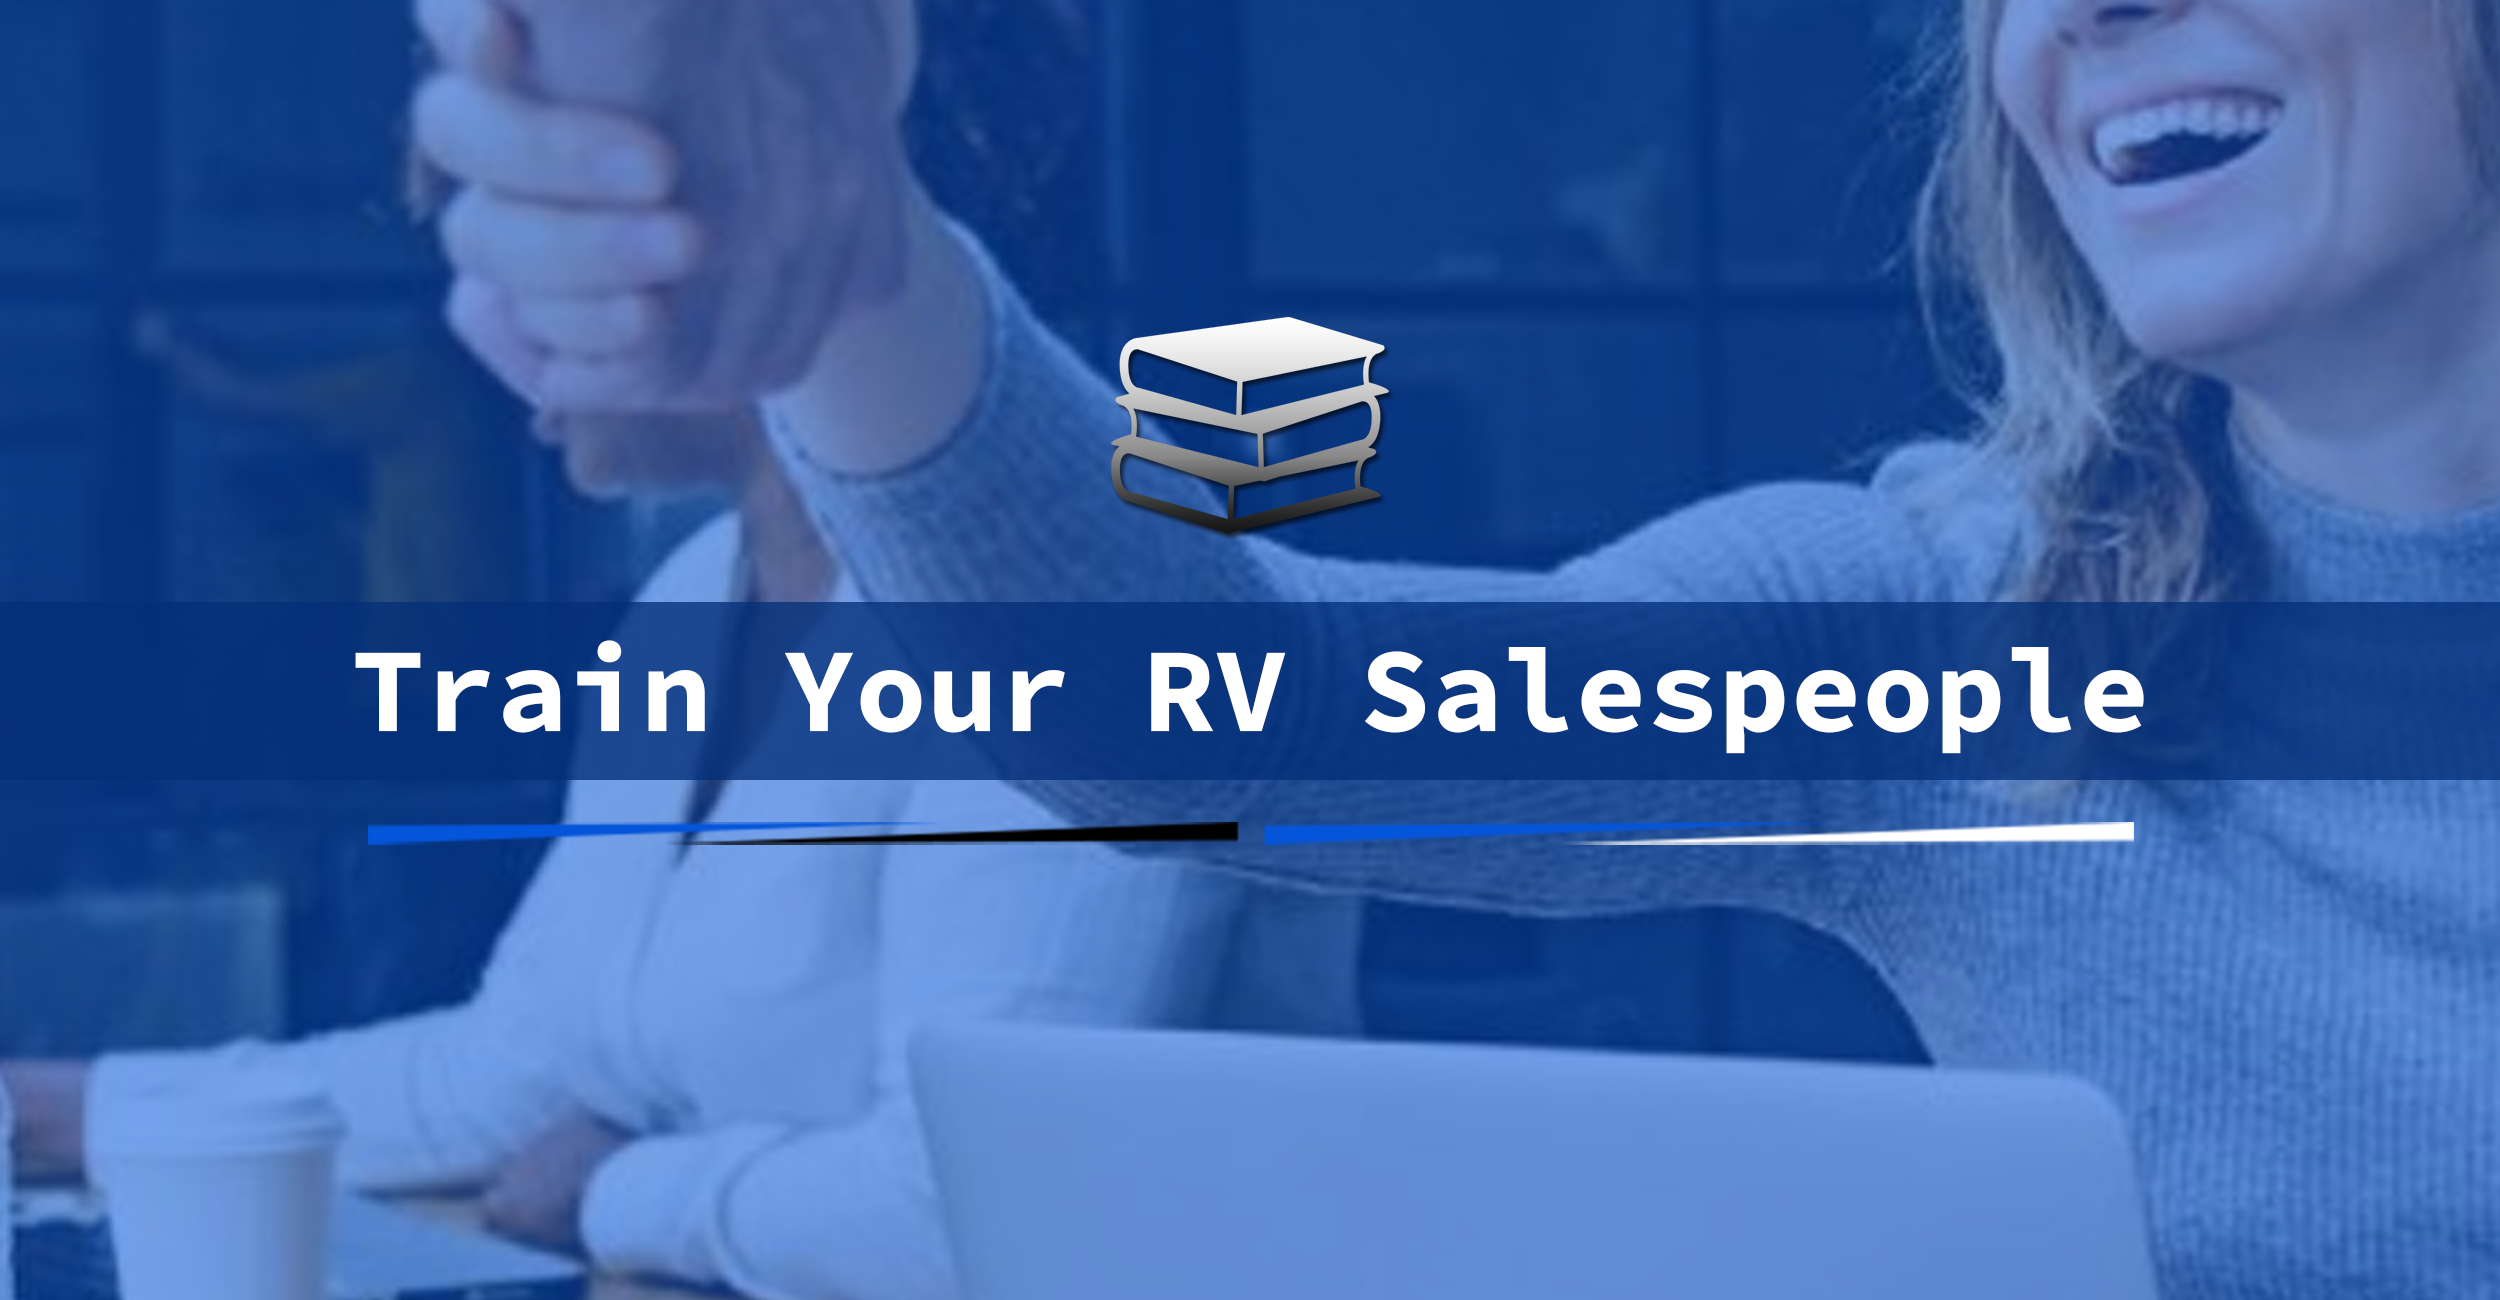 train your rv sales people